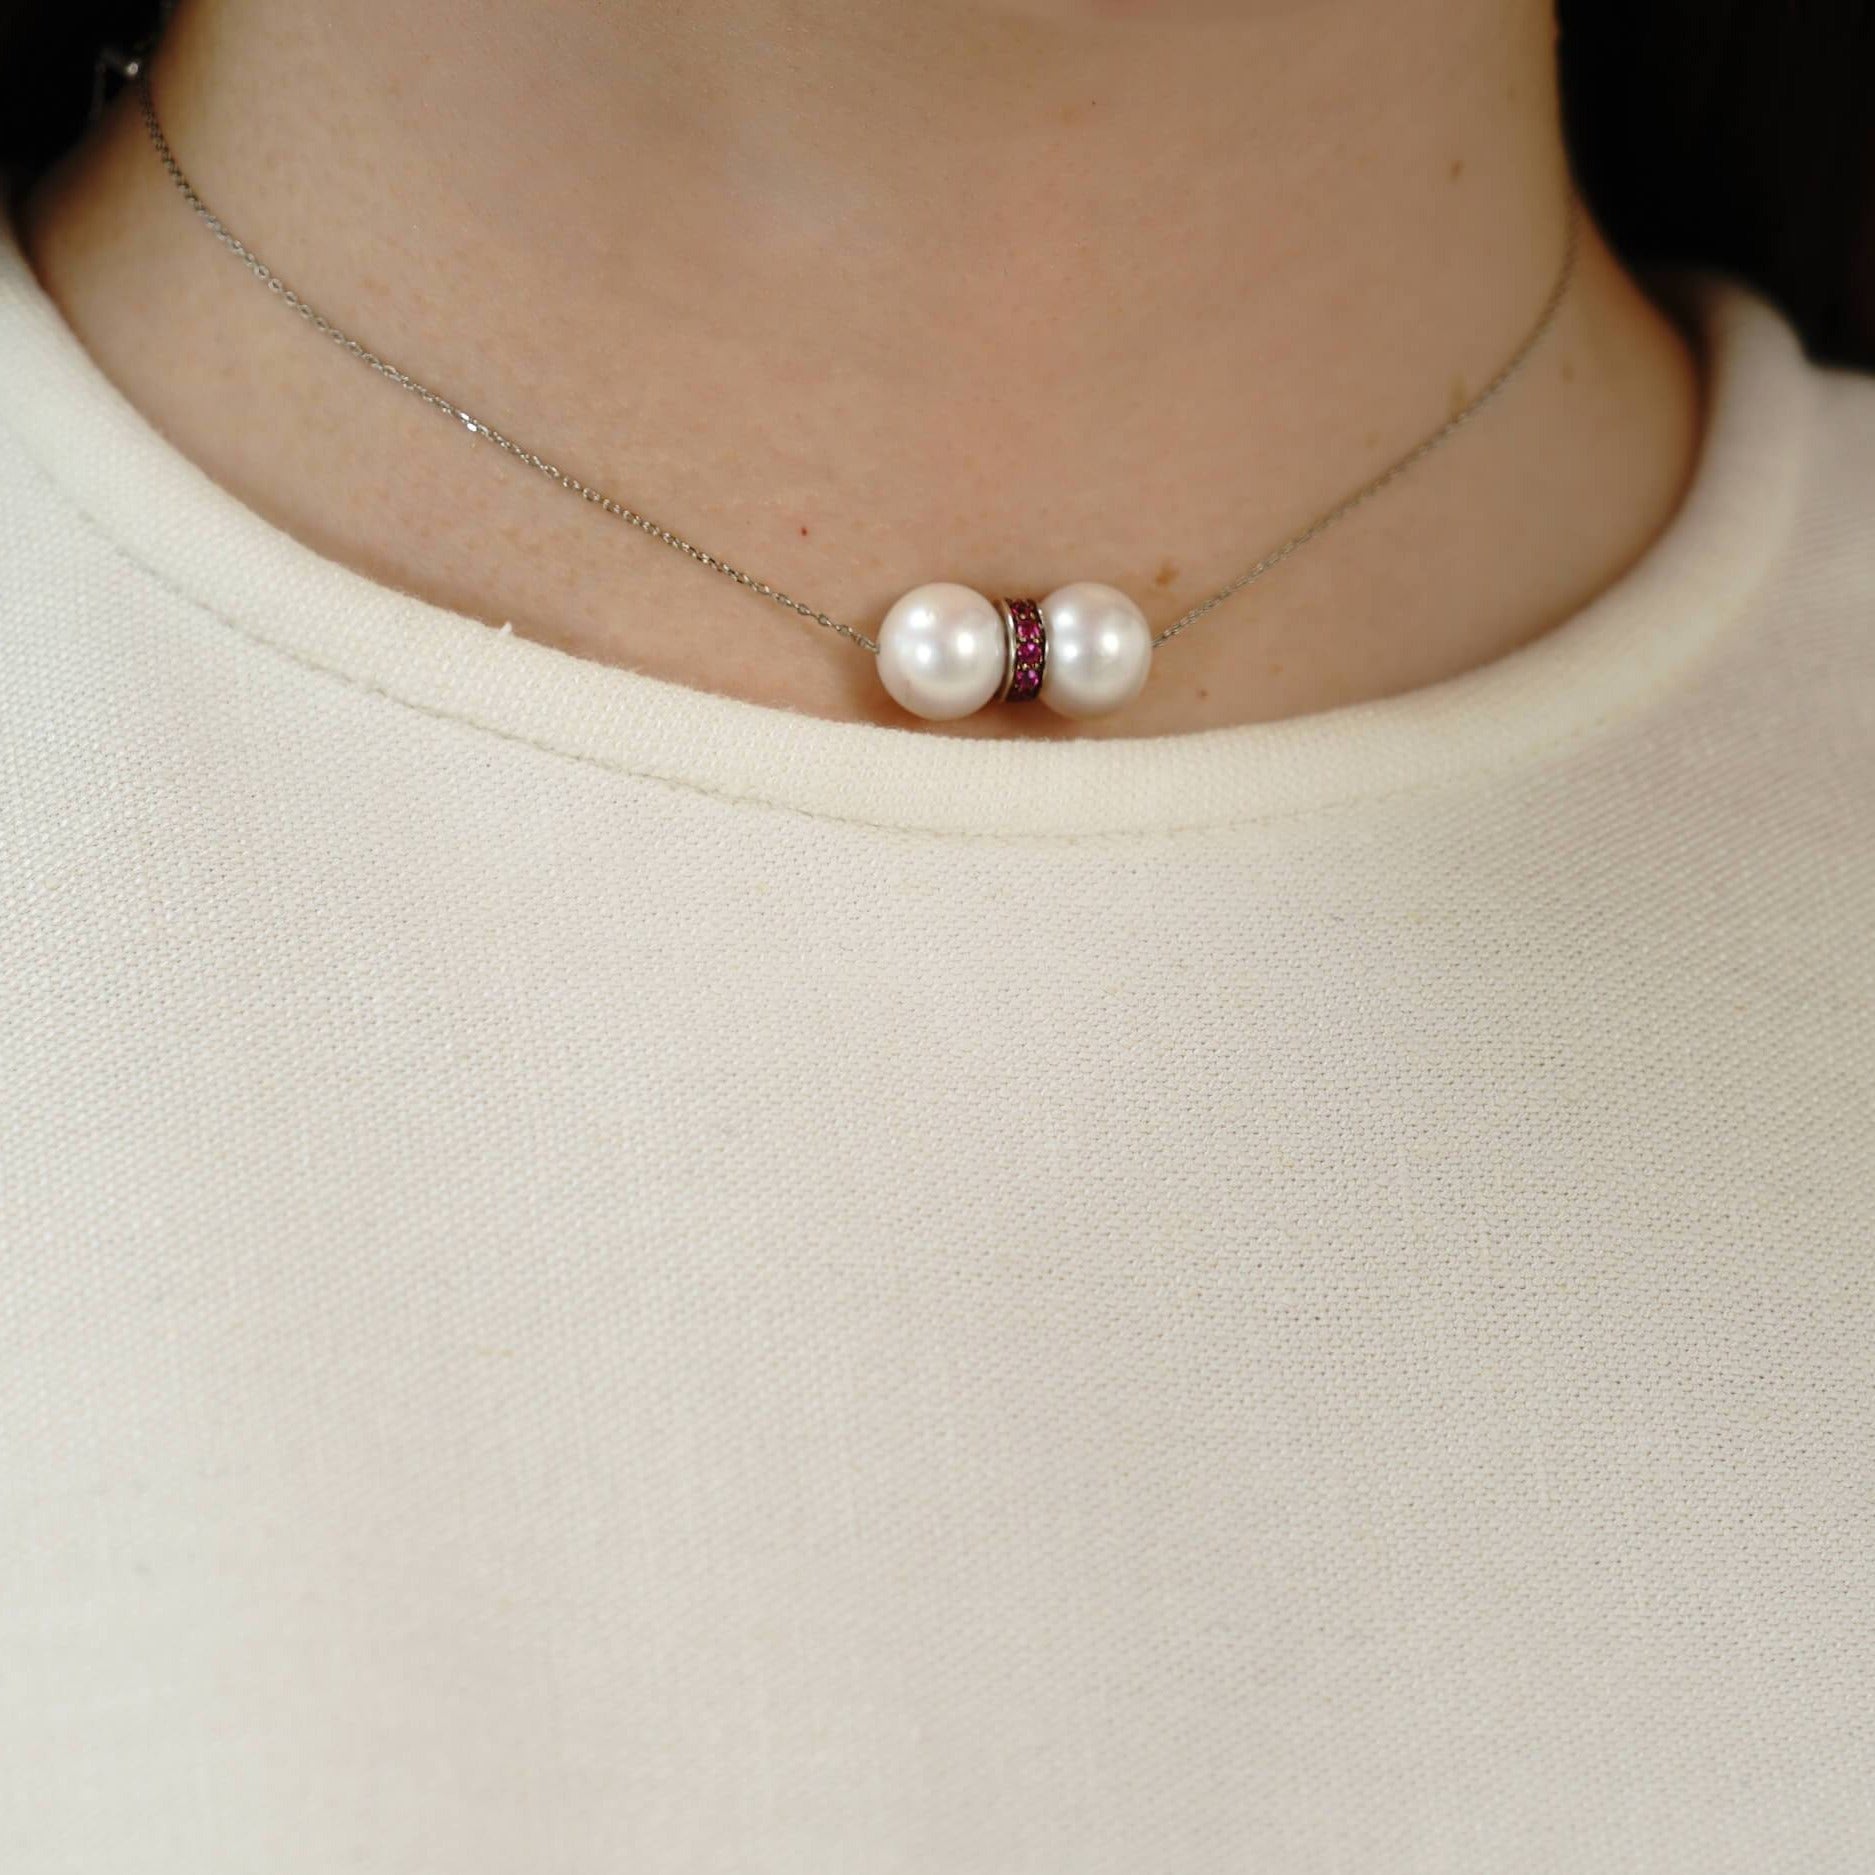 White Gold Chain With Pearl Pair and Pink Sapphires on Model